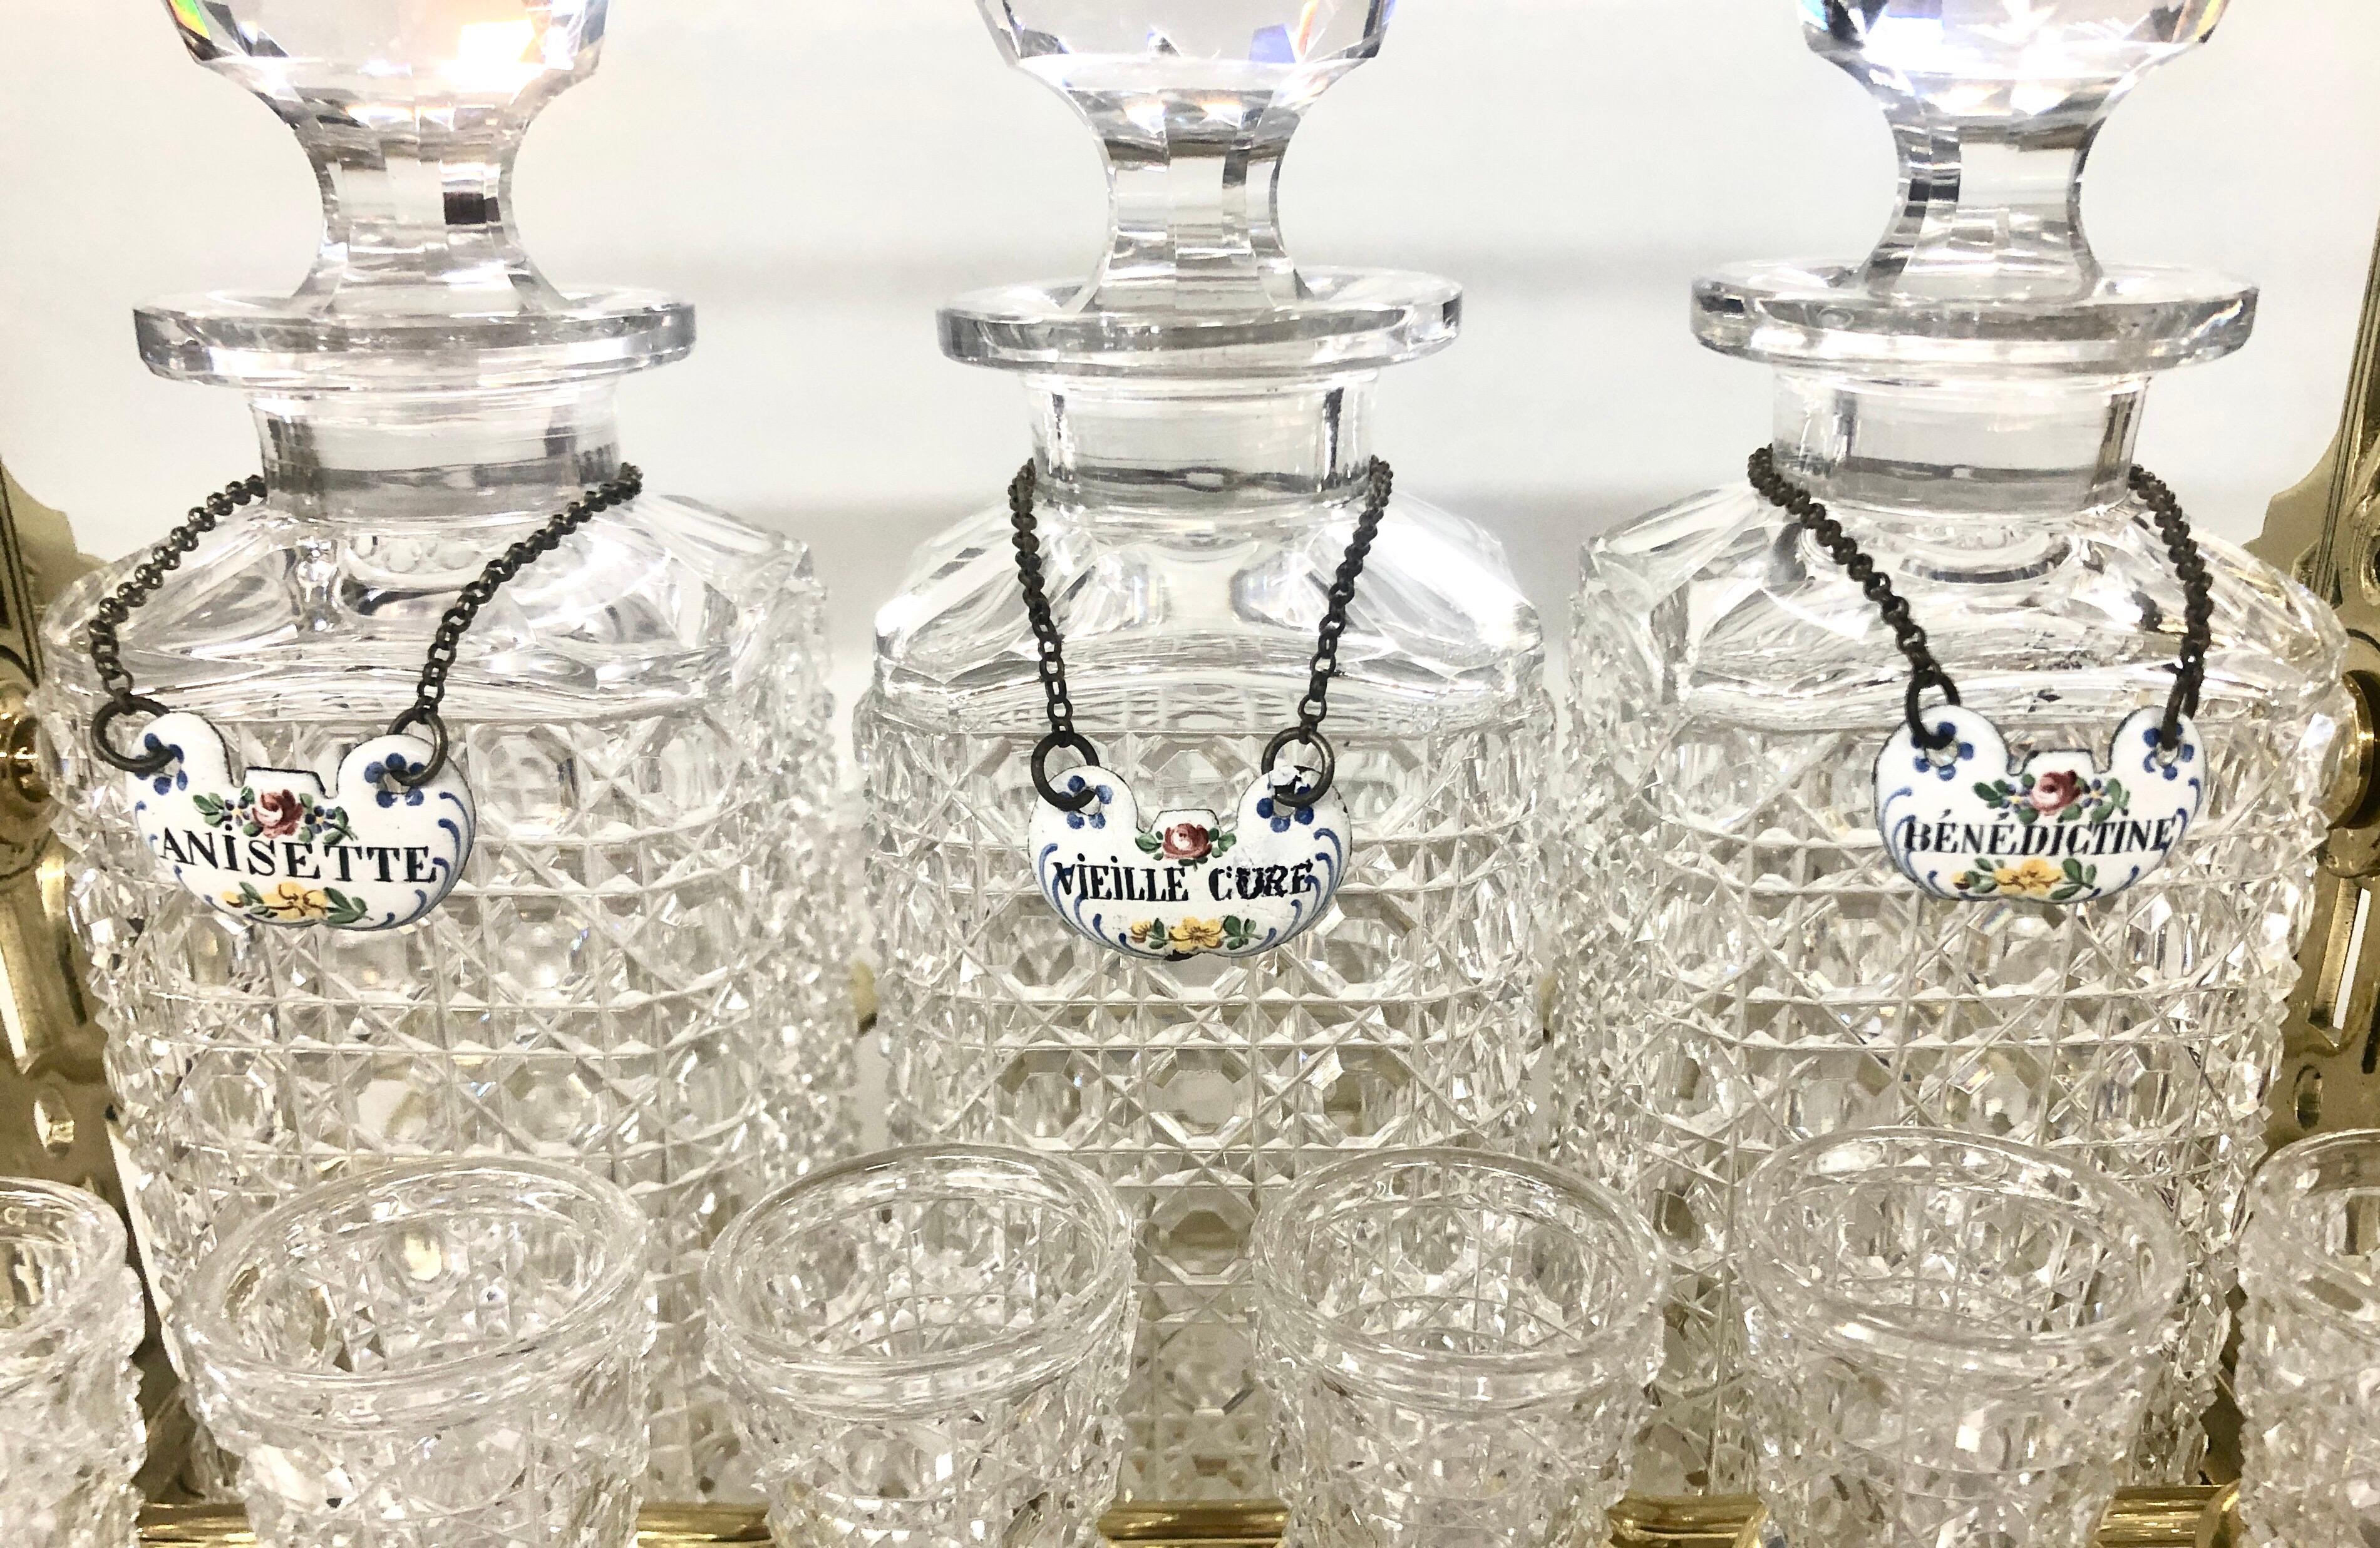 This is one of the most fabulous Baccarat Tantalus sets ever made with exceptionally hand cut crystal square decanters in the 